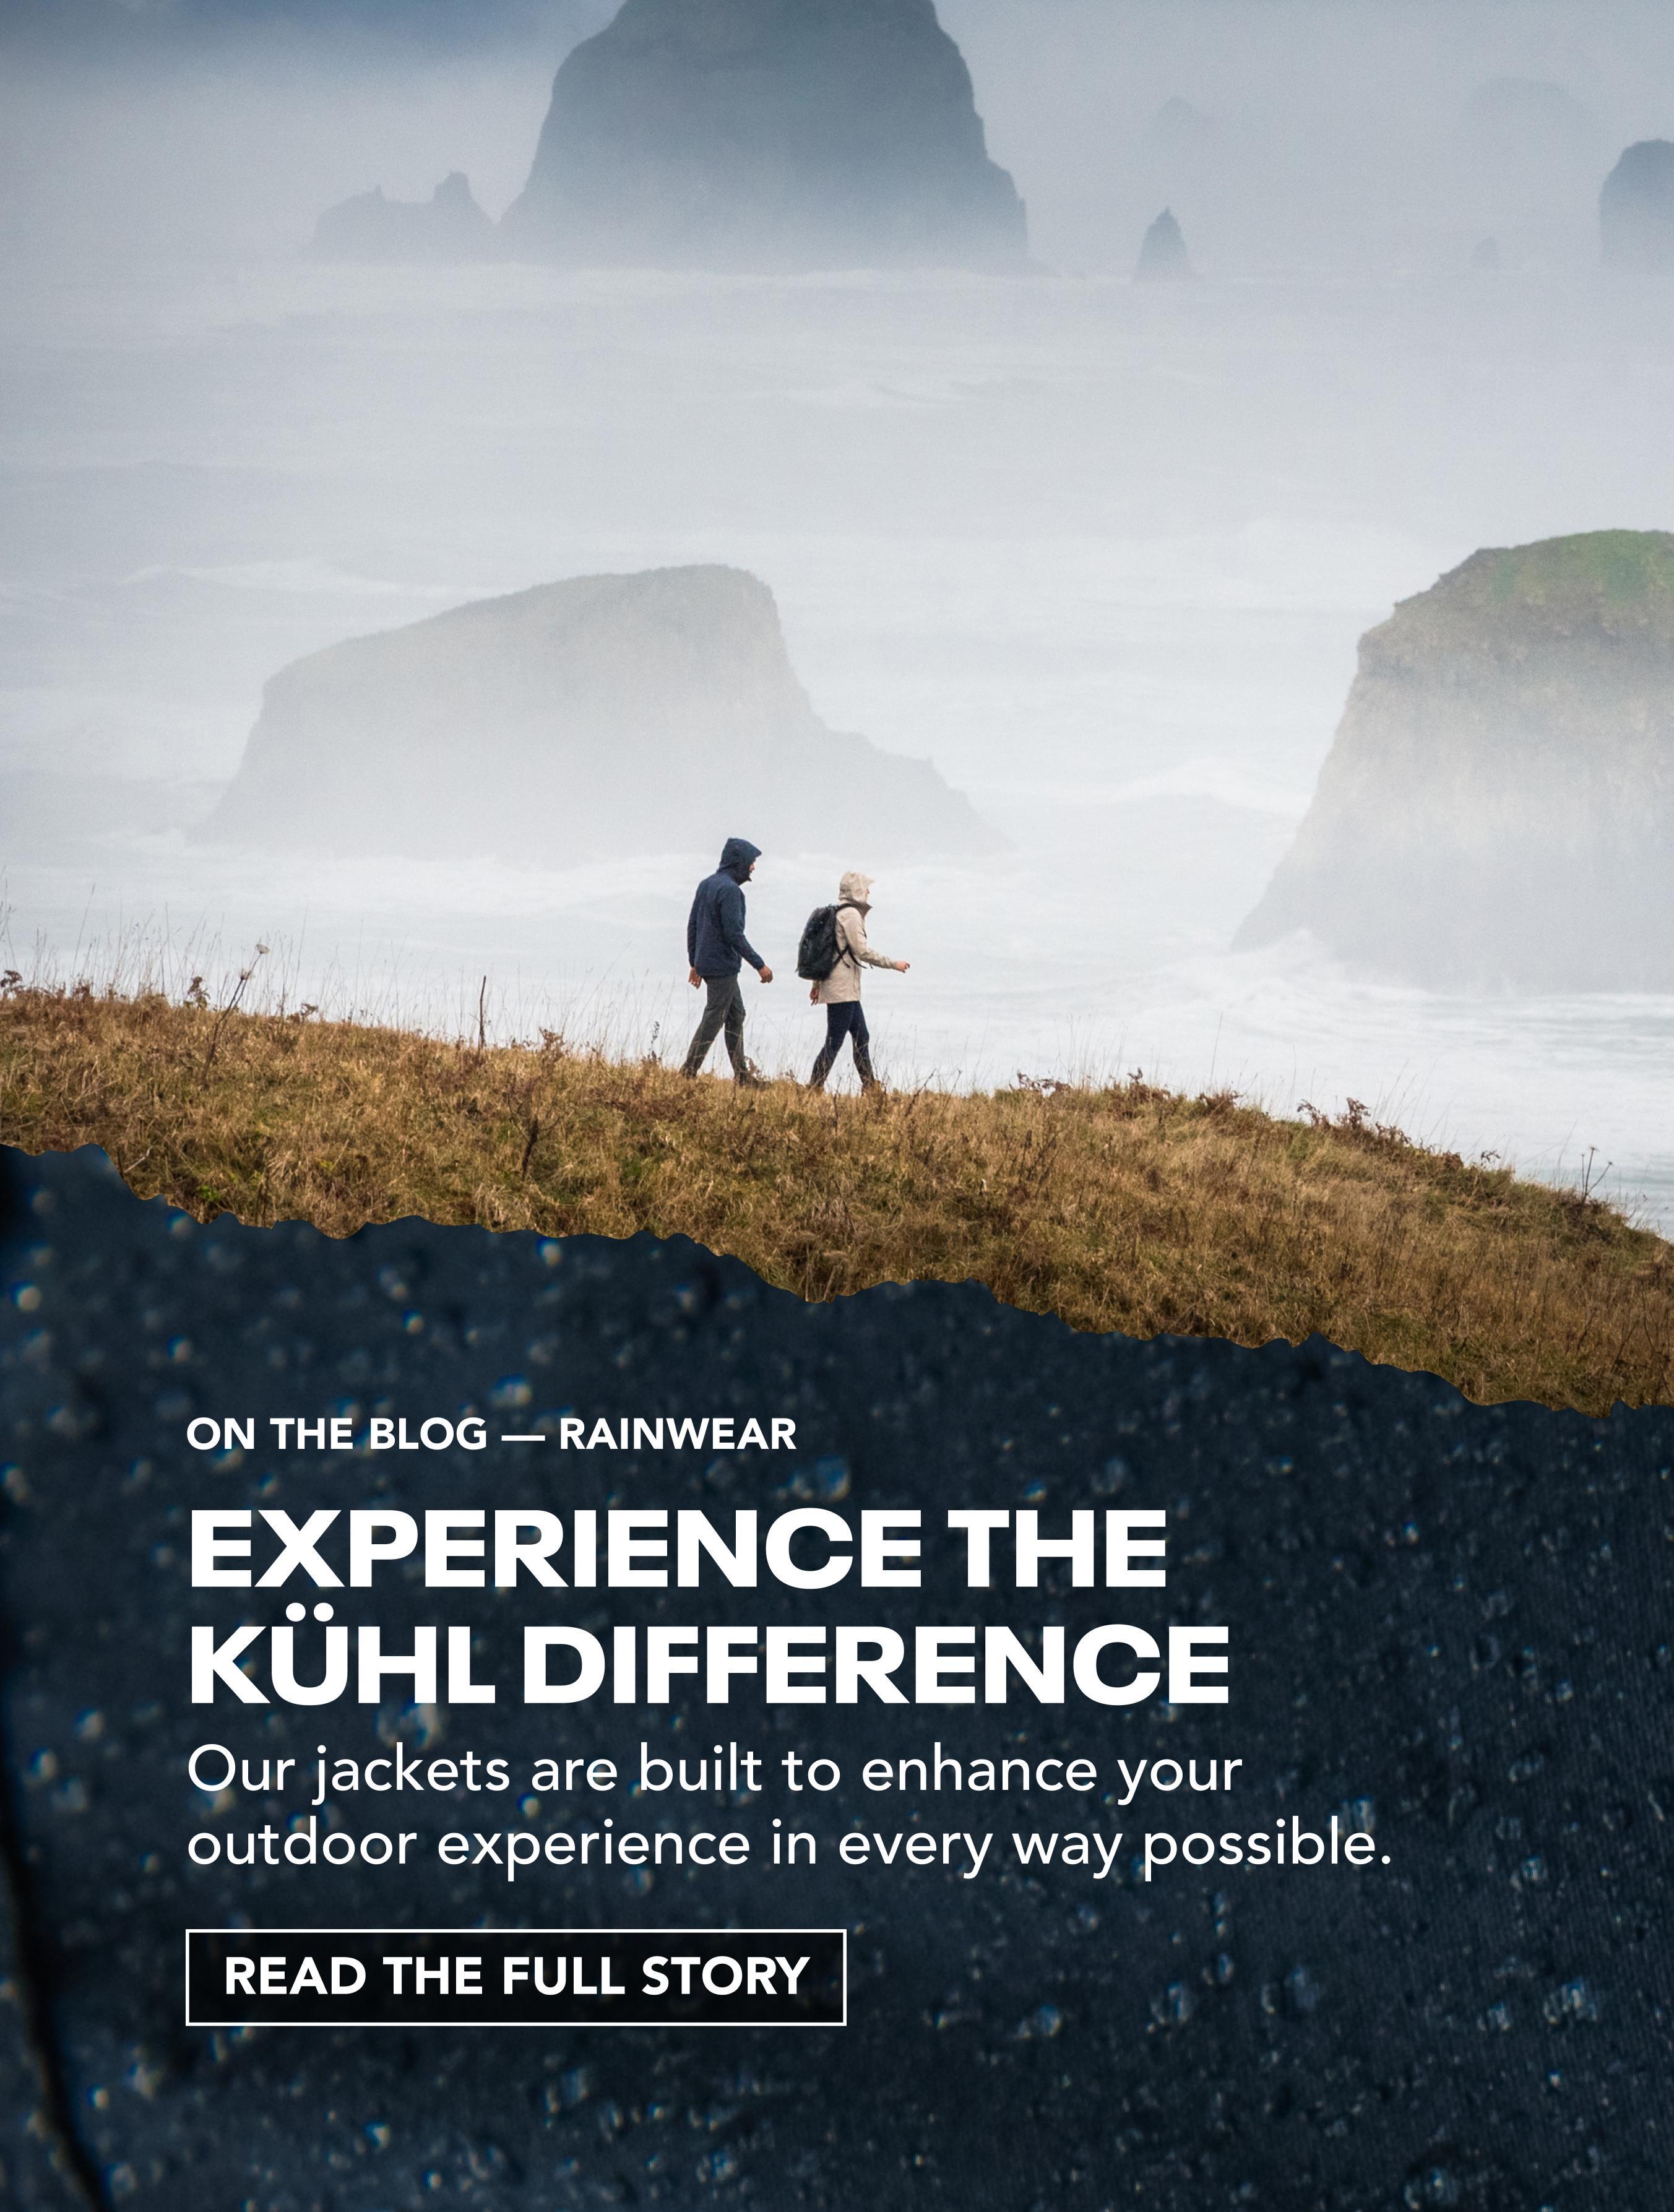 RAINWEAR: EXPERIENCE THE KUHL DIFFERENCE